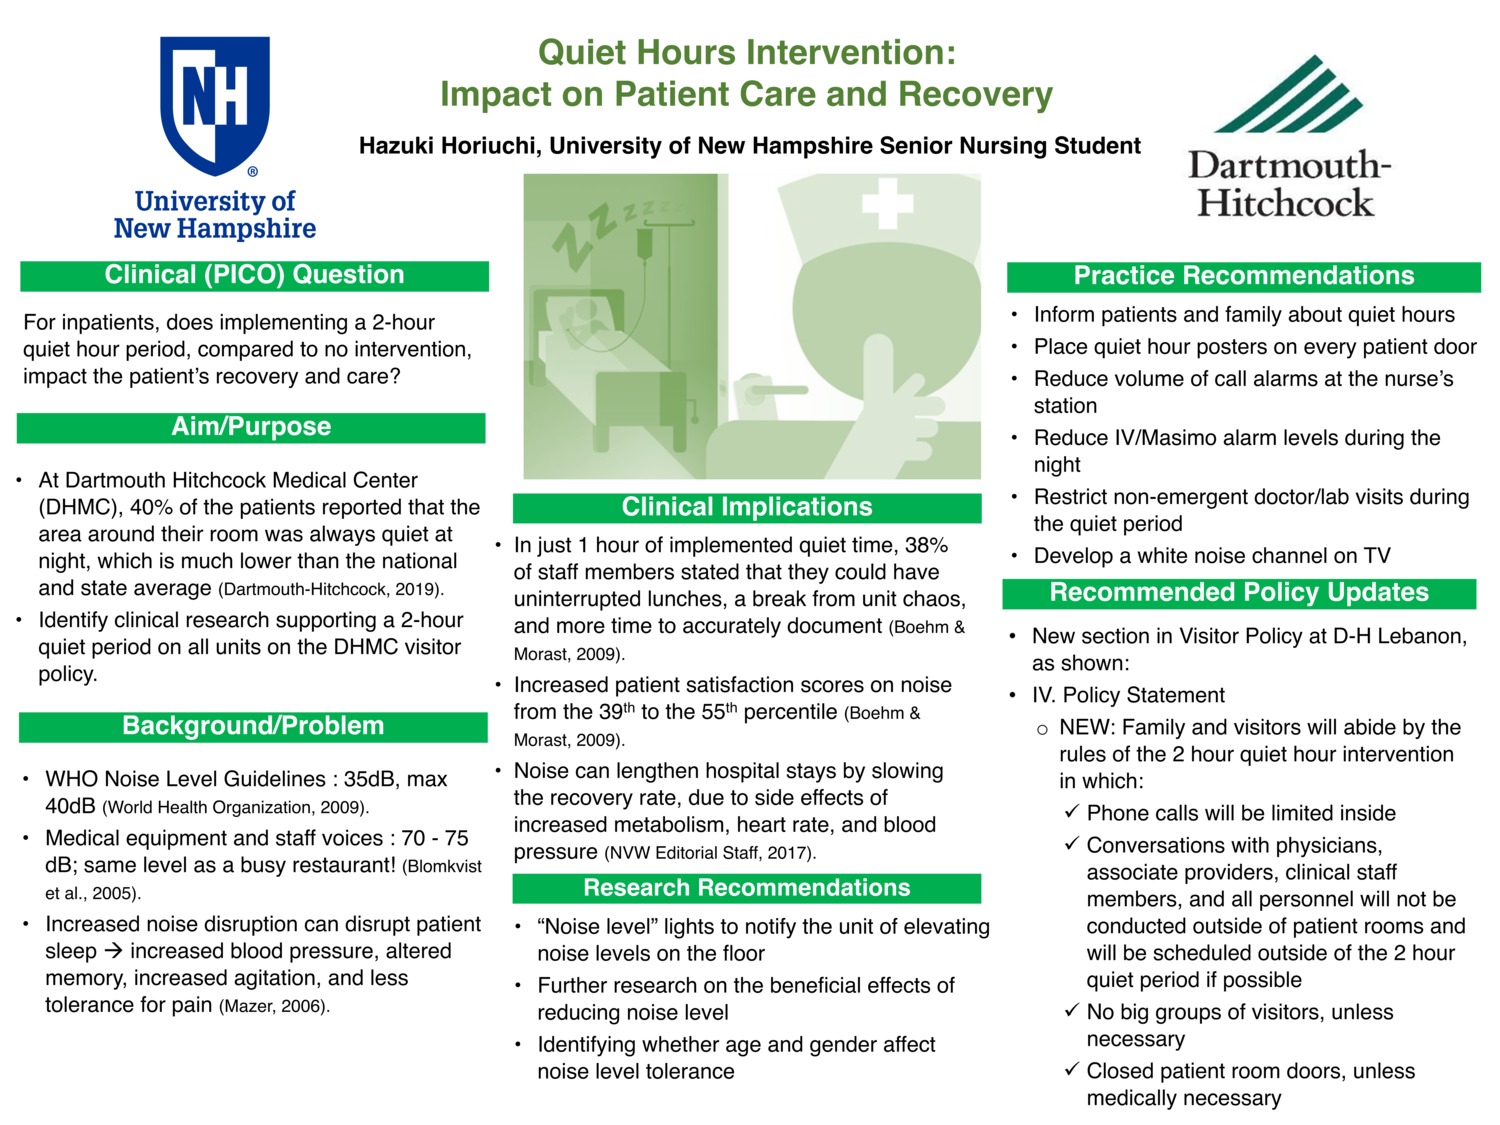 Quiet Hours Intervention: Impact On Patient Care And Recovery by hh1009